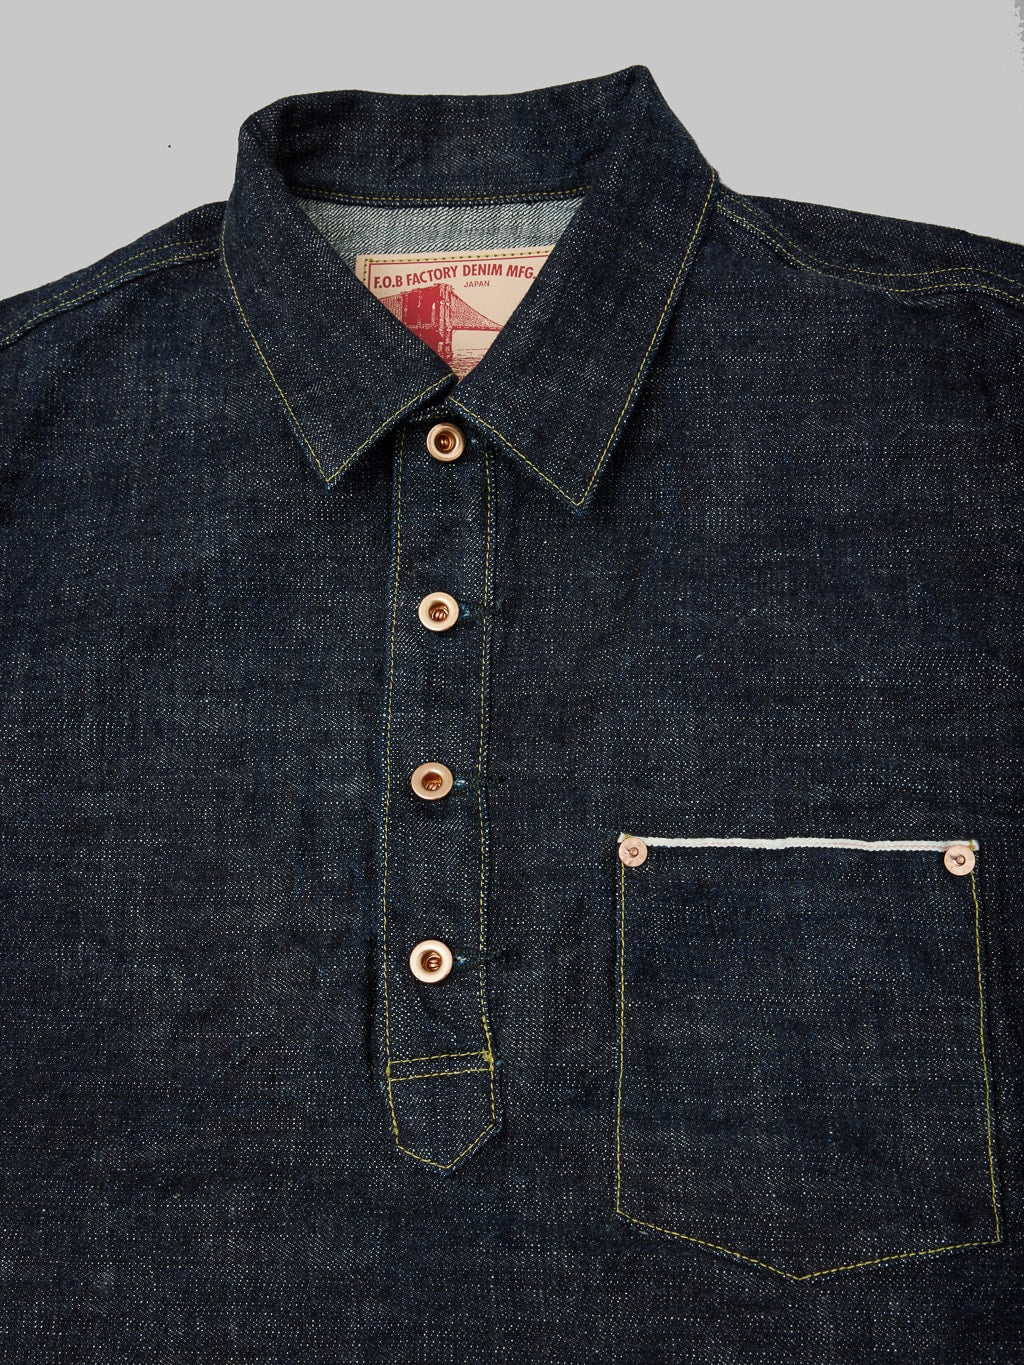 Fob factory denim pullover pocket shirt front buttons view